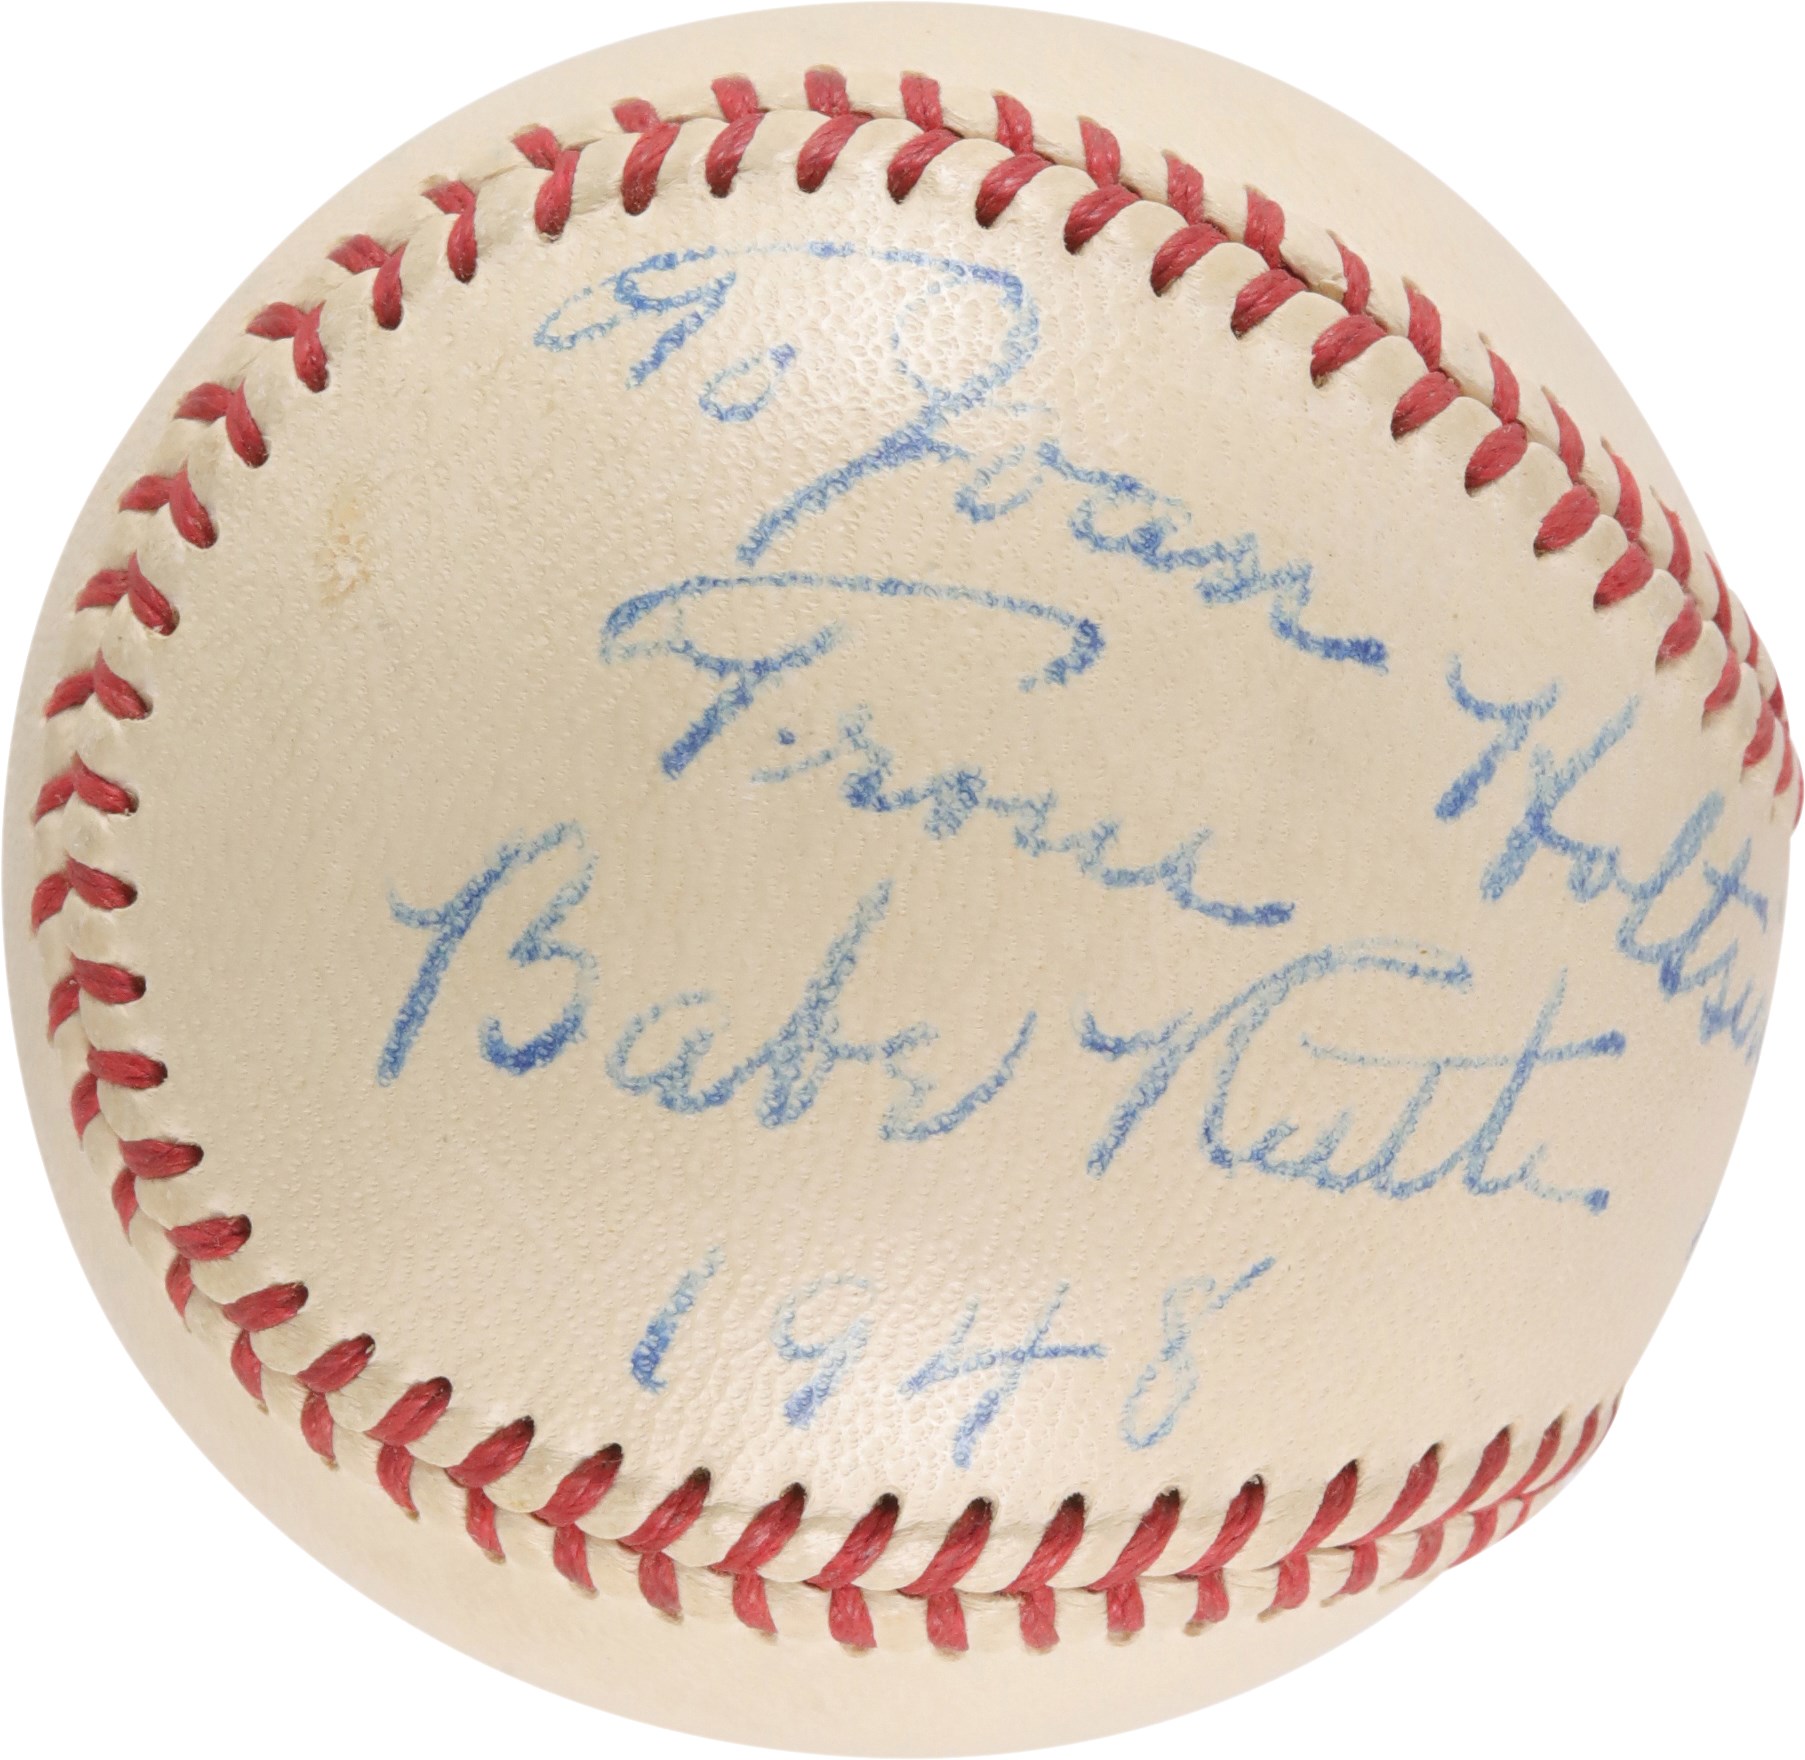 Ruth and Gehrig - Gorgeous 1948 Babe Ruth Single-Signed Baseball (PSA NM 7 Overall)